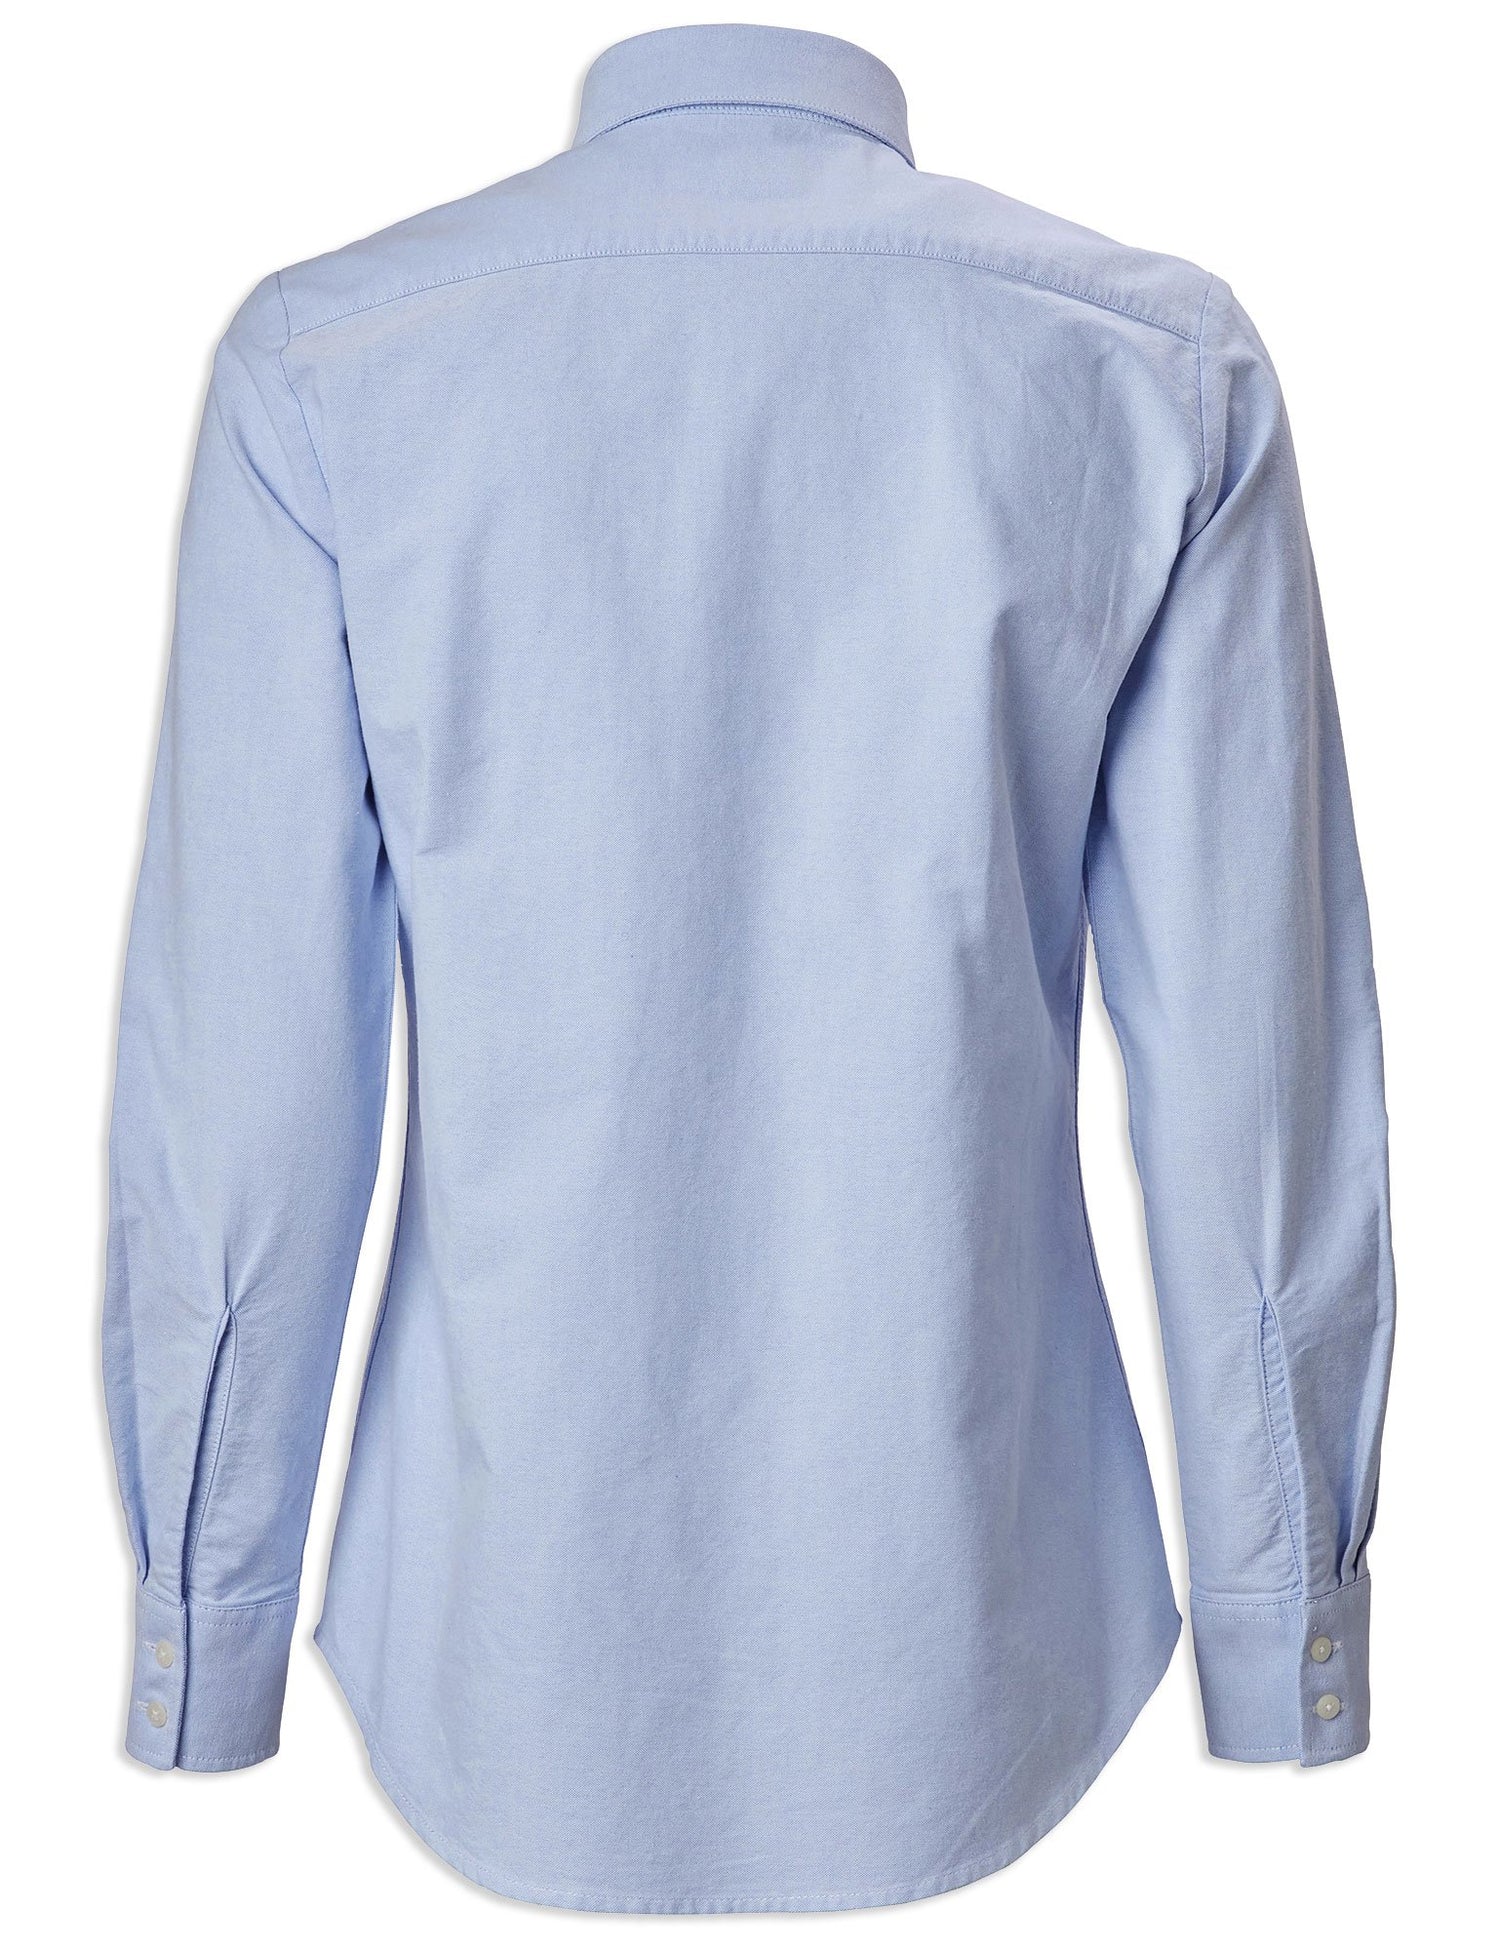 Back View Musto Ladies Oxford Long Sleeve Shirt